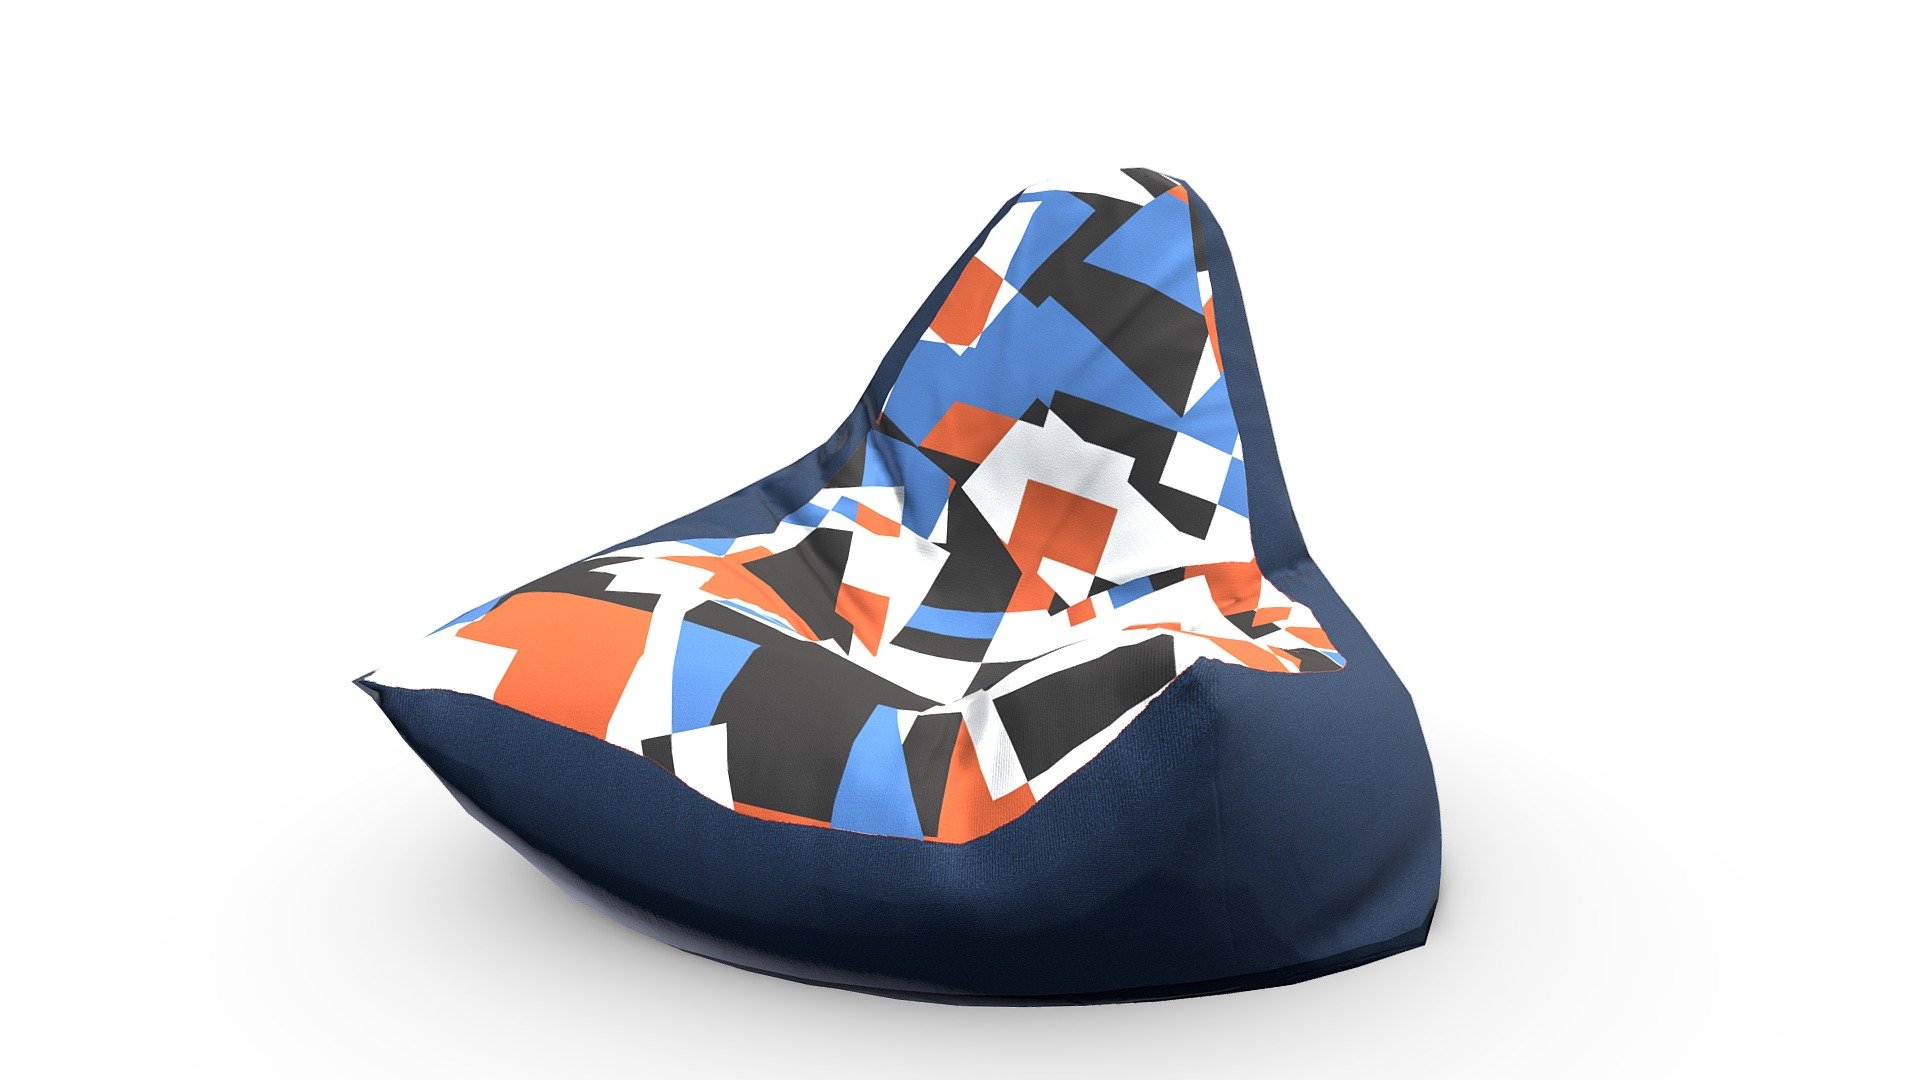 Bean Bag. 
Inside out brings to you highly detailed, optimized, with PBR materials.
Can be used for any project and platform.
AR, VR, Anroid, IOS, PC, etc.
All maps albedo, normal, roughness, aoc, metallic and height are perfectly created with love and care and optimized for all platforms.
Ready to be used in unity or unreal or any other engine.

*All textures are included in the package.

Features:
- PBR validated
- Super optimized 3D models
- HD textures to boost every single detail
- VR ready
- AR ready
- 4k Textures - Sacco Bean Bag - Buy Royalty Free 3D model by Inside Out Art (@ranajitdas) 3d model